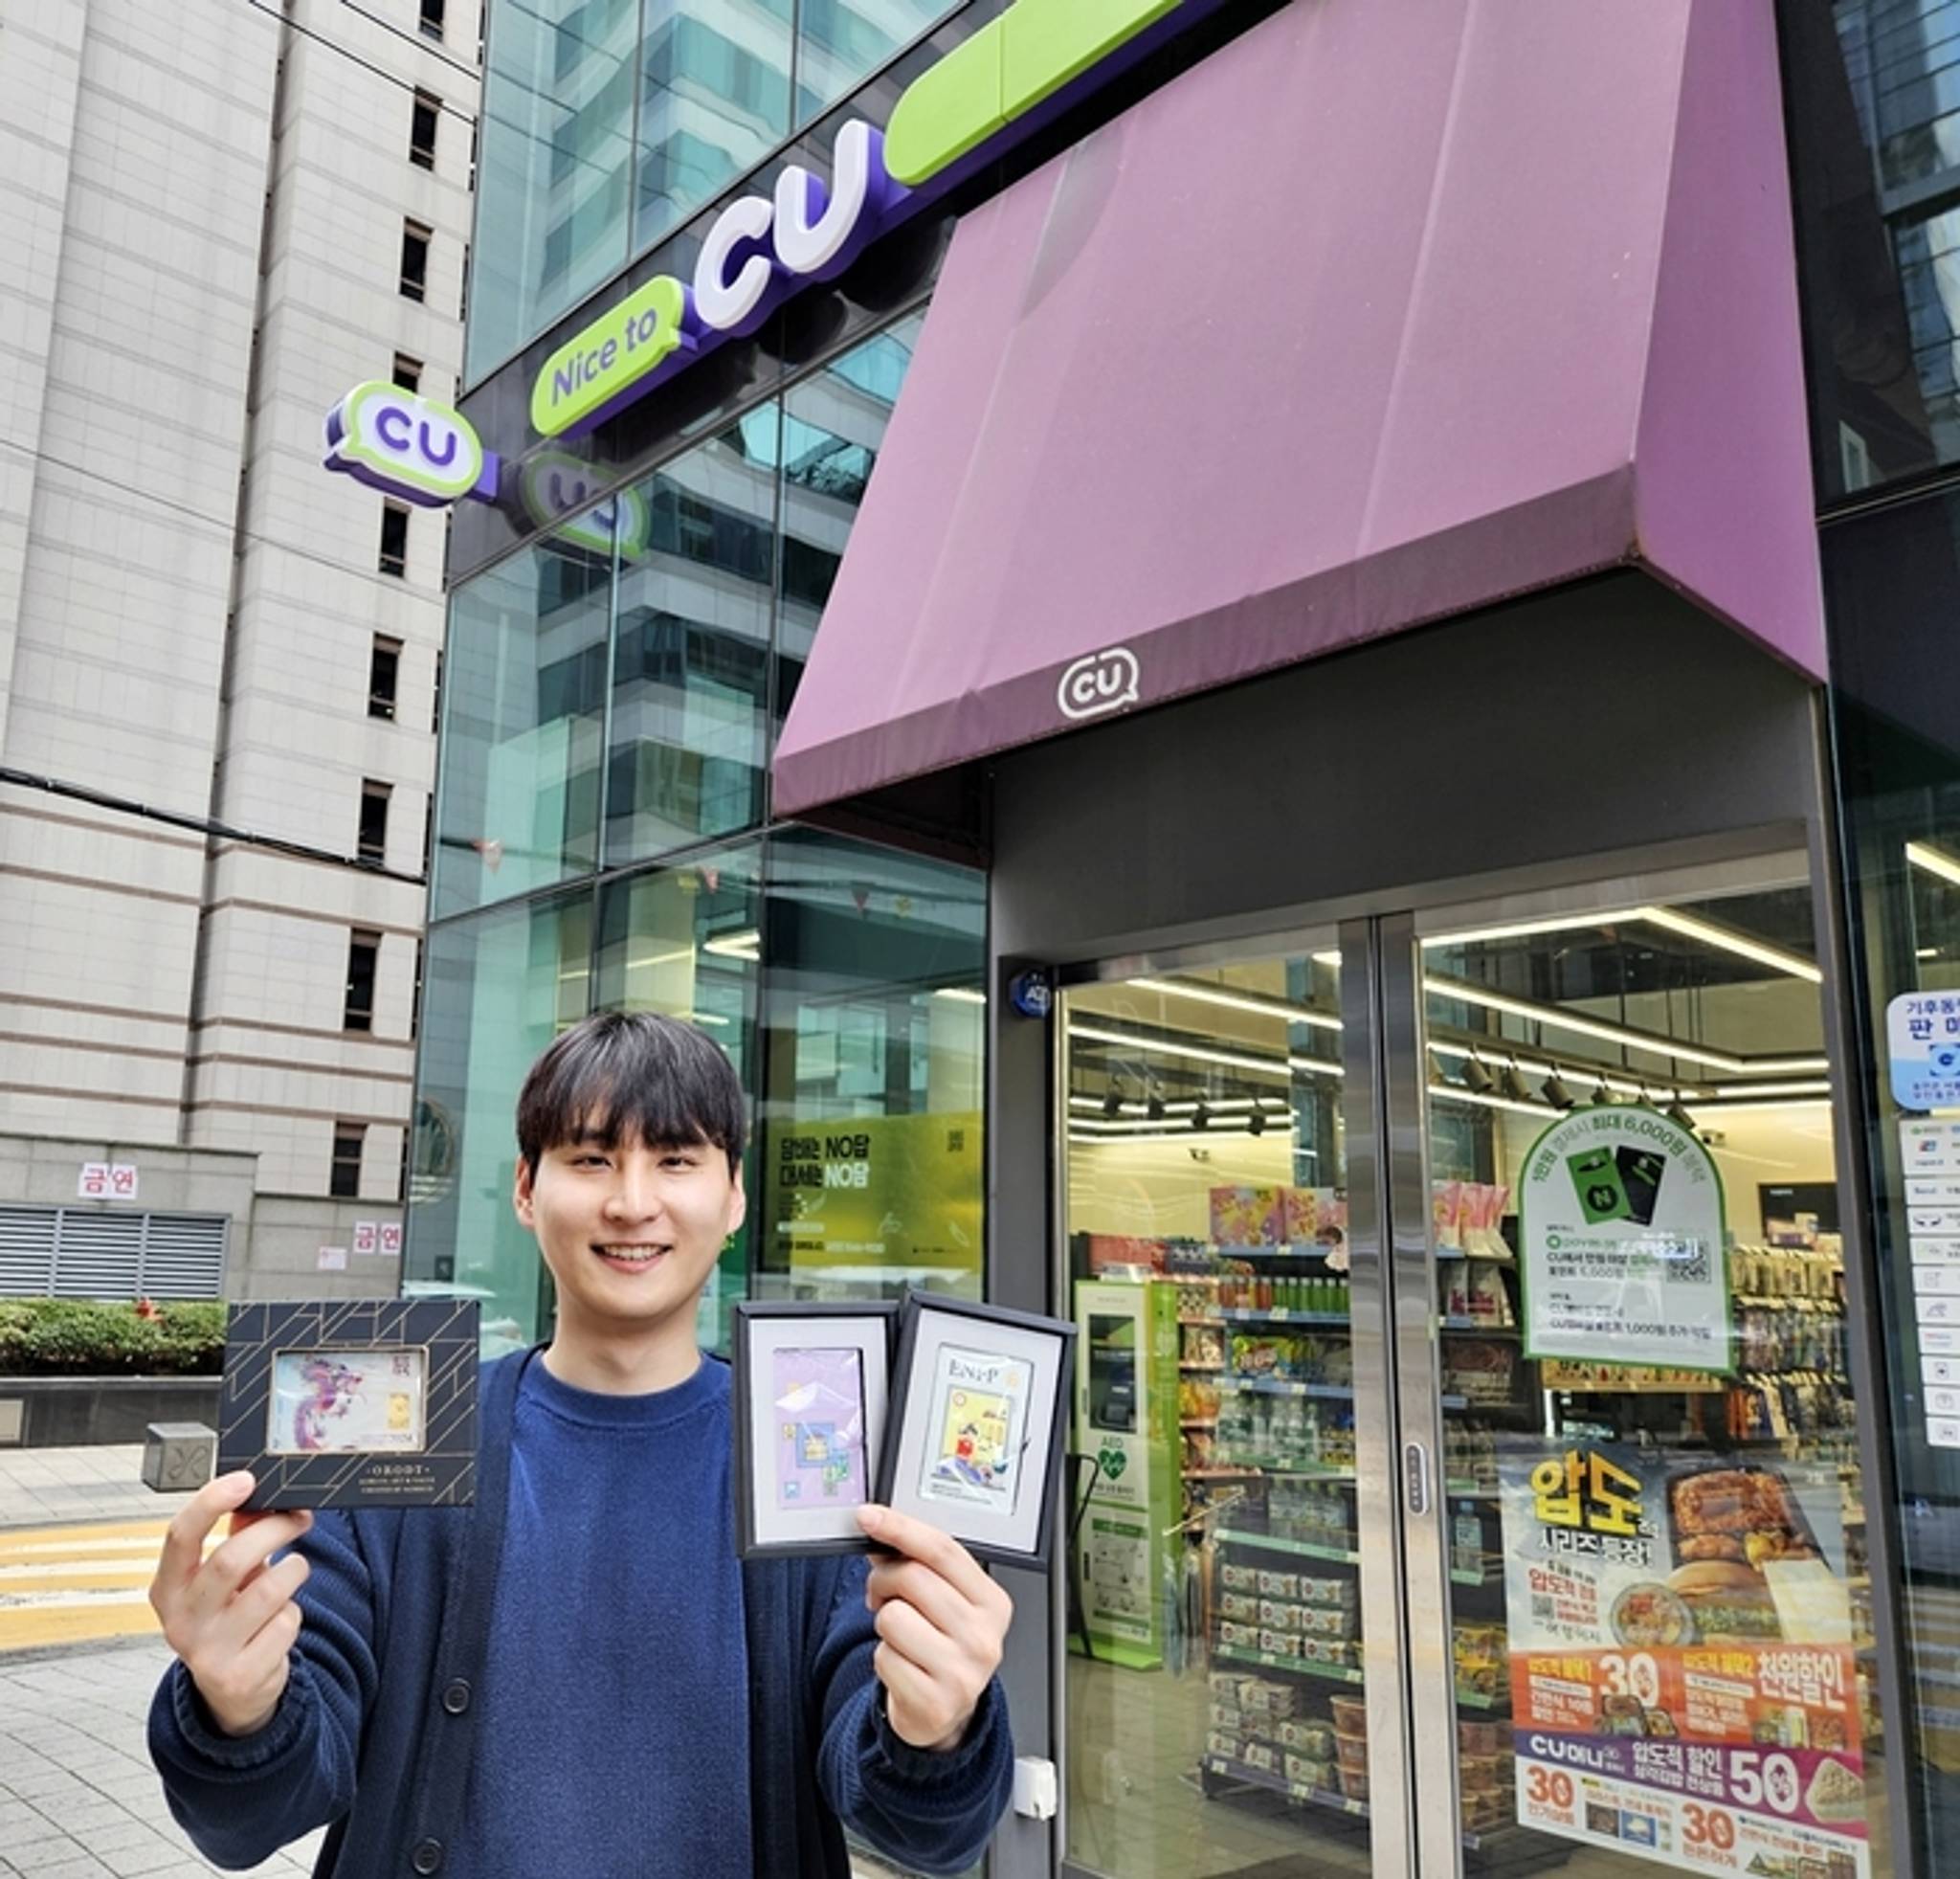 Korean convenience stores are selling gold bars